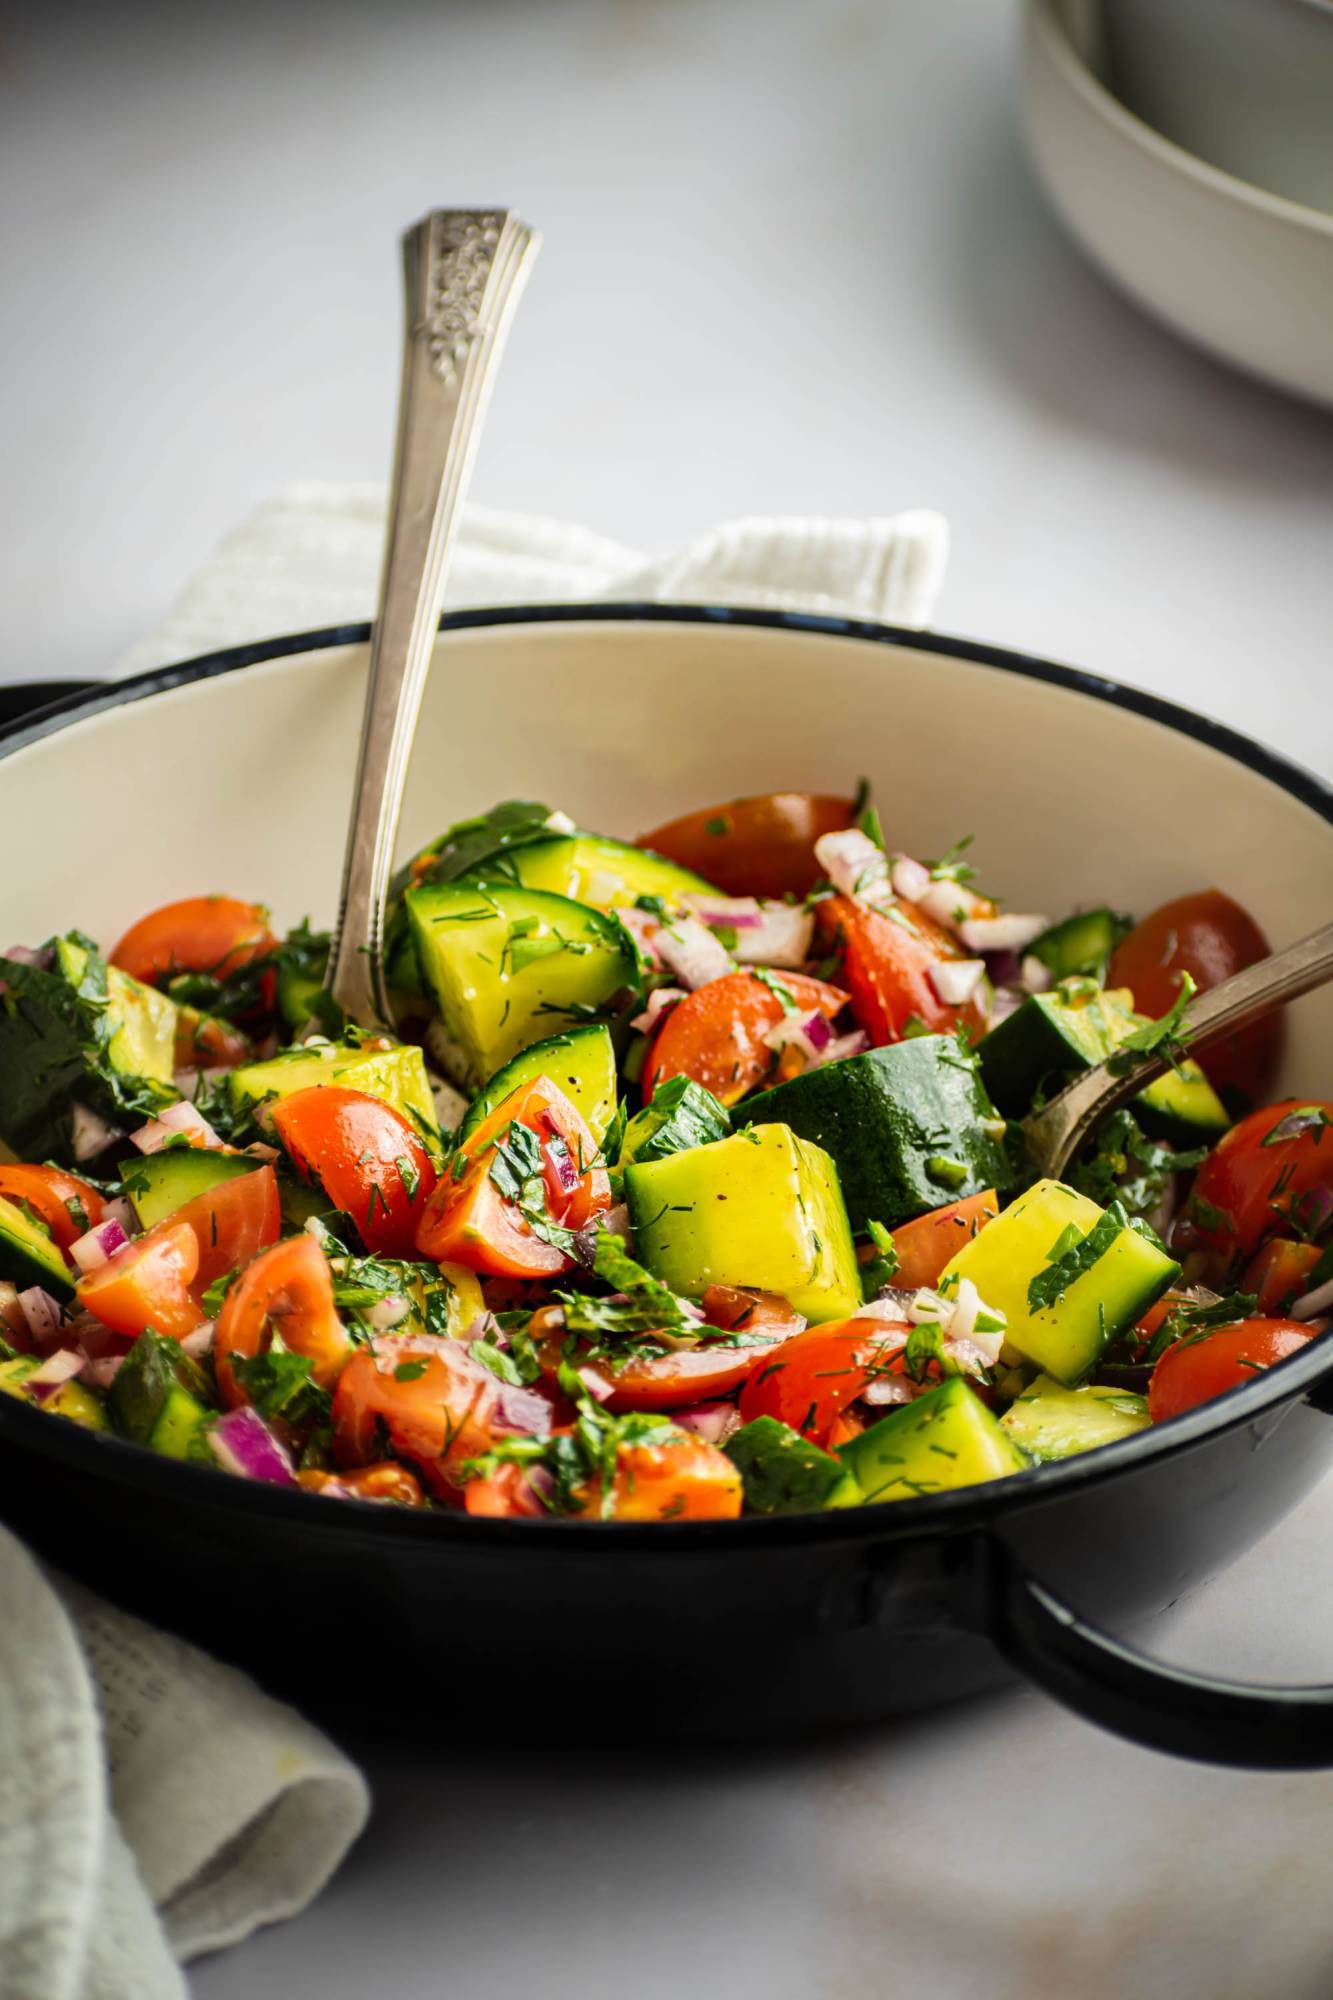 Tomato and cucumber Israeli salad with fresh herbs in a bowl with lemon juice and olive oil.